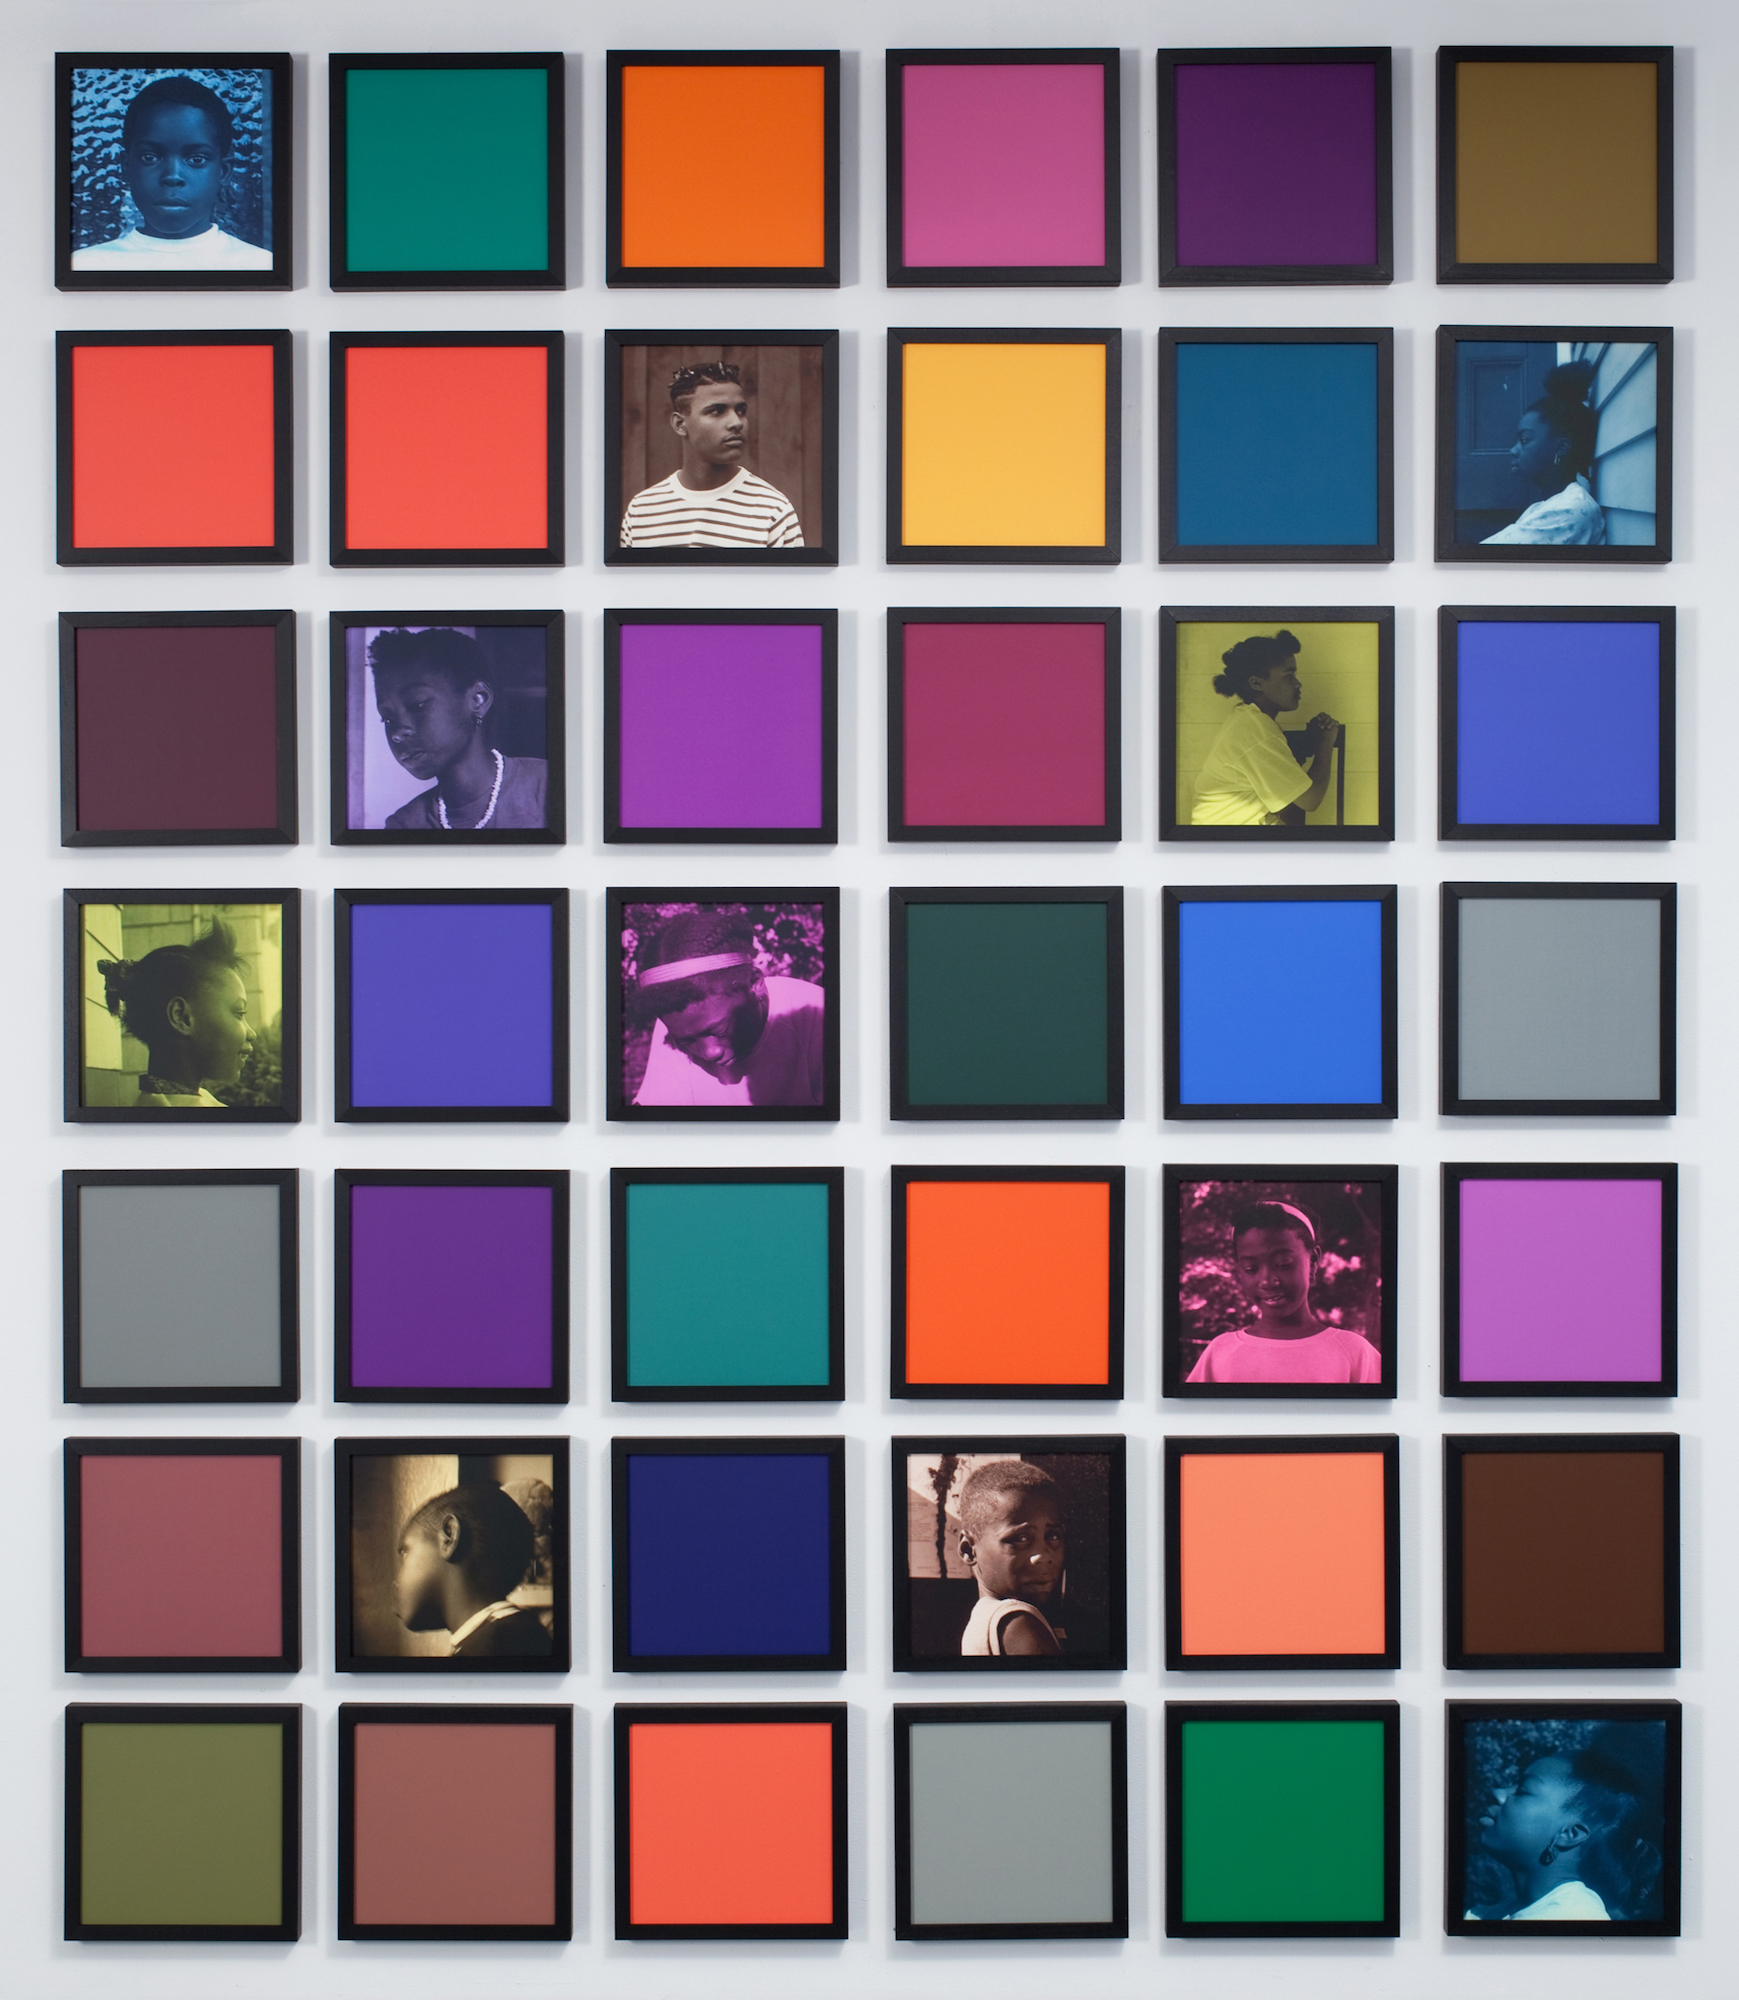 42 multi-colored, black framed square panels arranged in a grid. Eleven squares with a portrait.